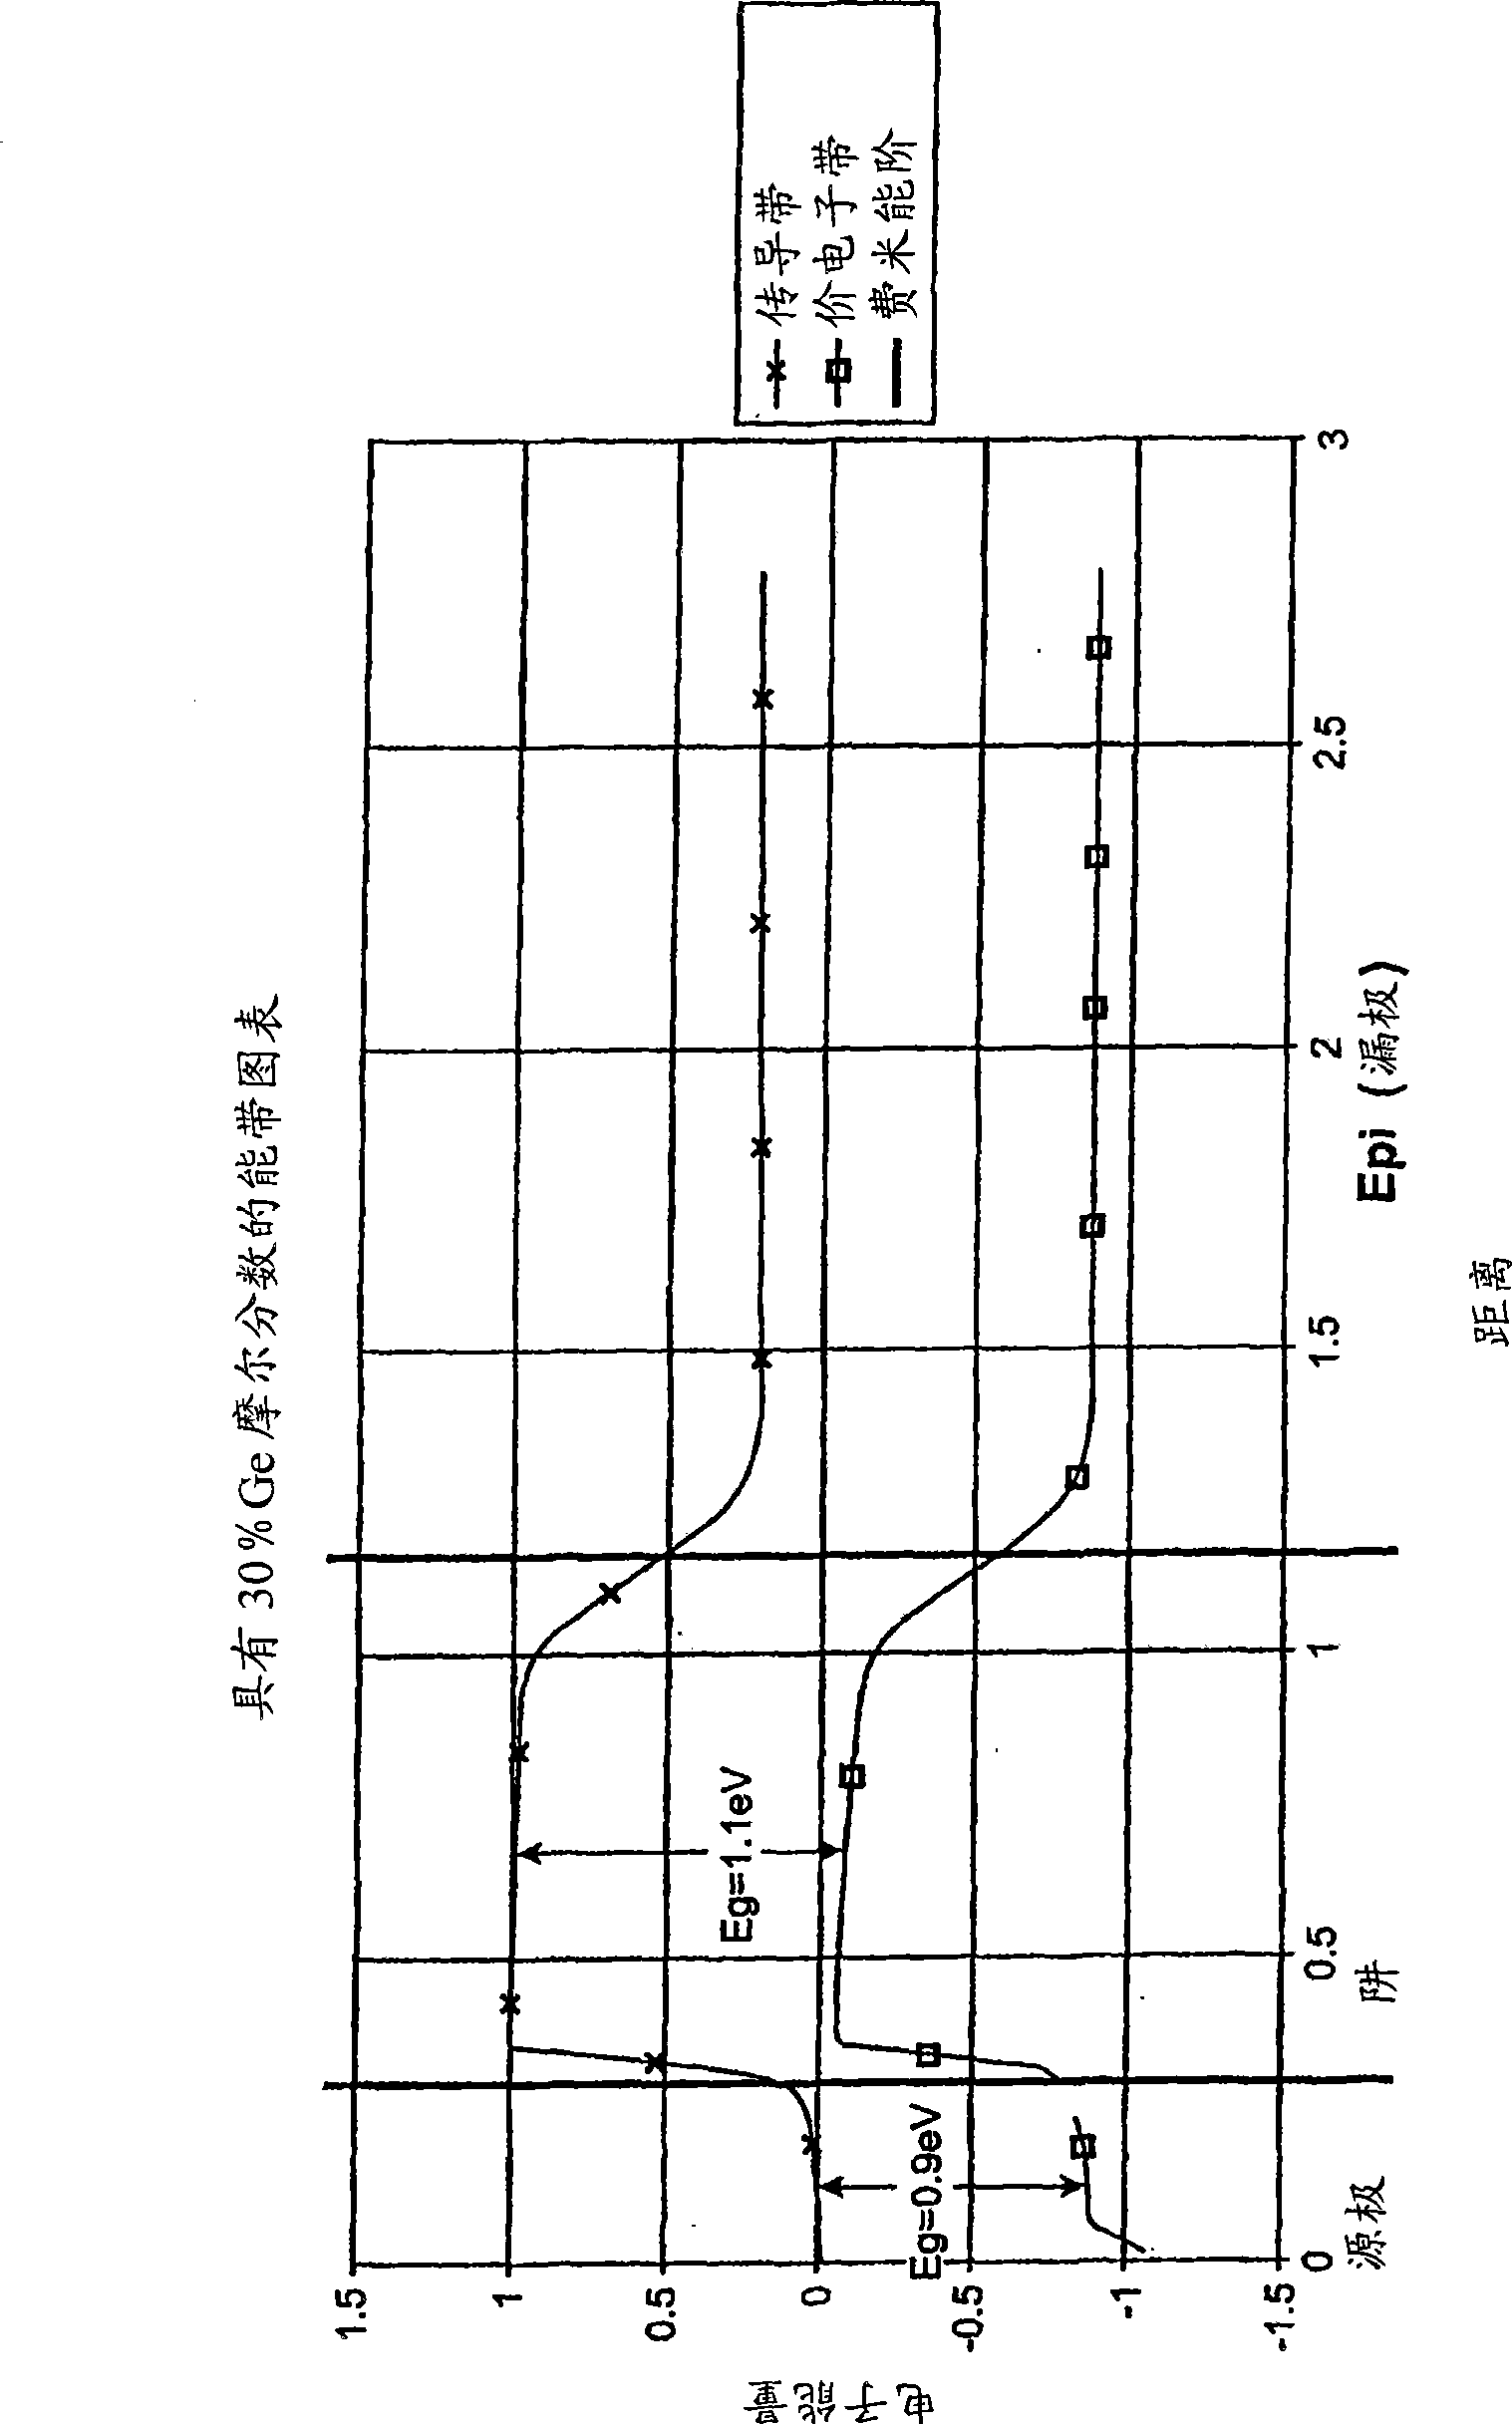 Power trench MOSFET having SiGe/Si channel structure